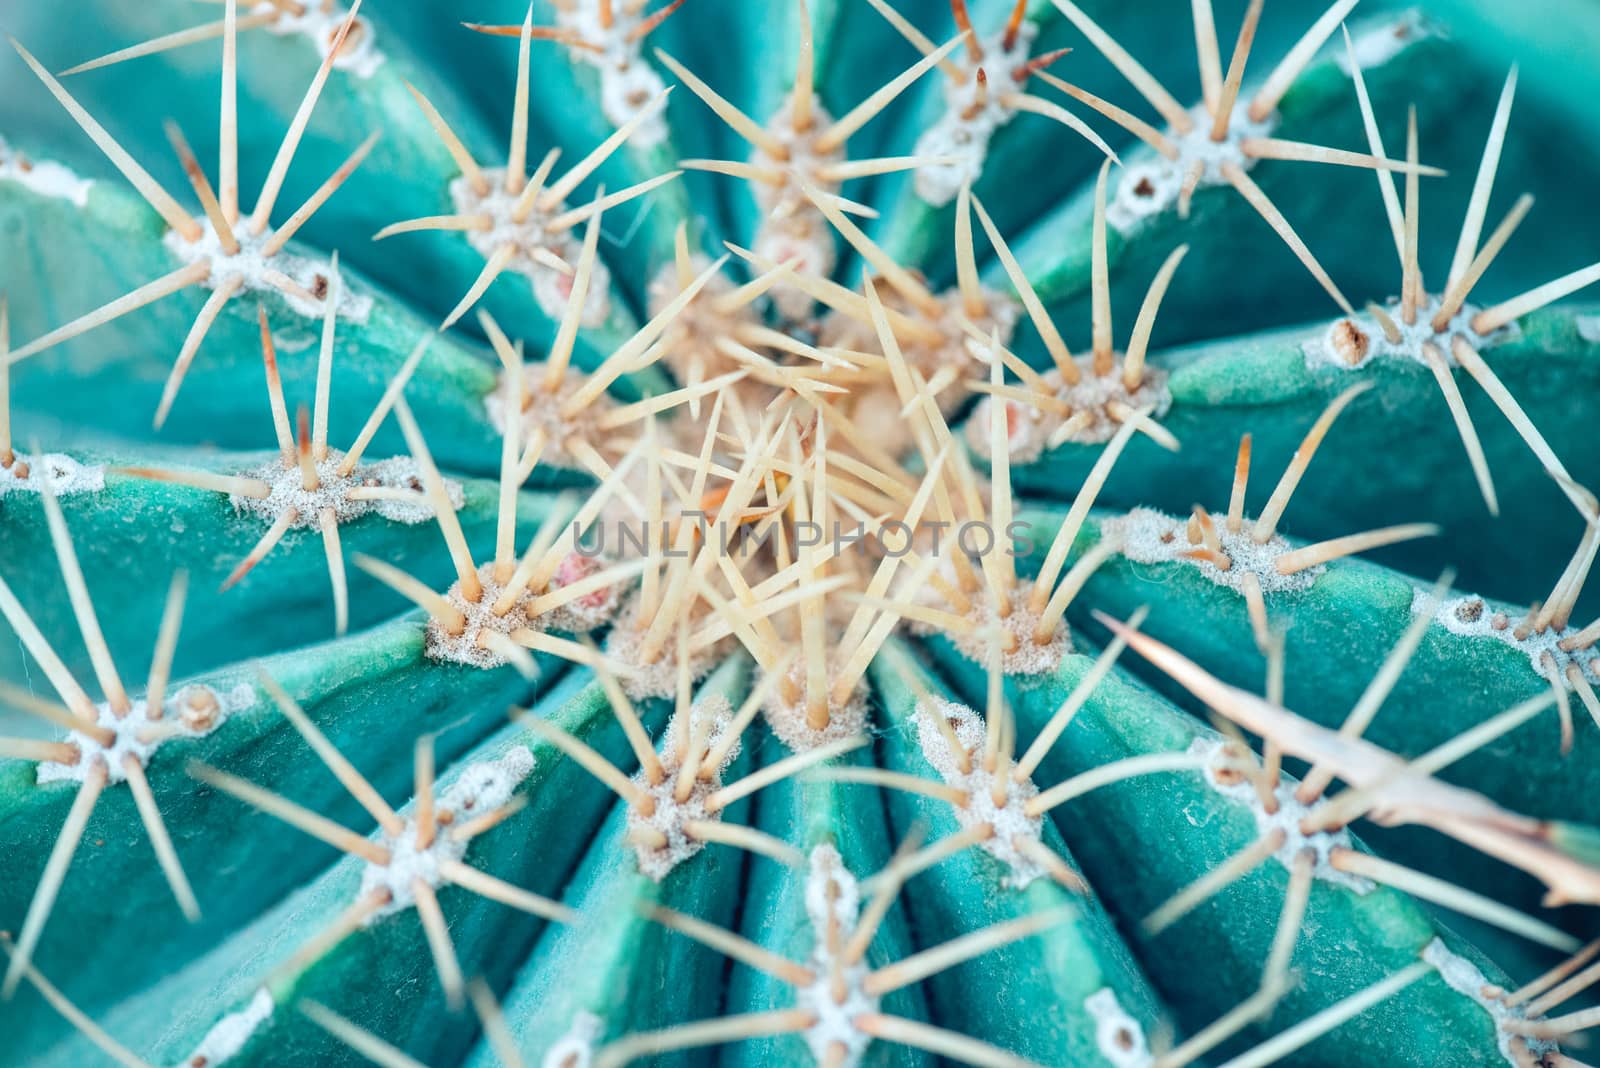 Cose up of globe shaped cactus with long thorns.  Top view